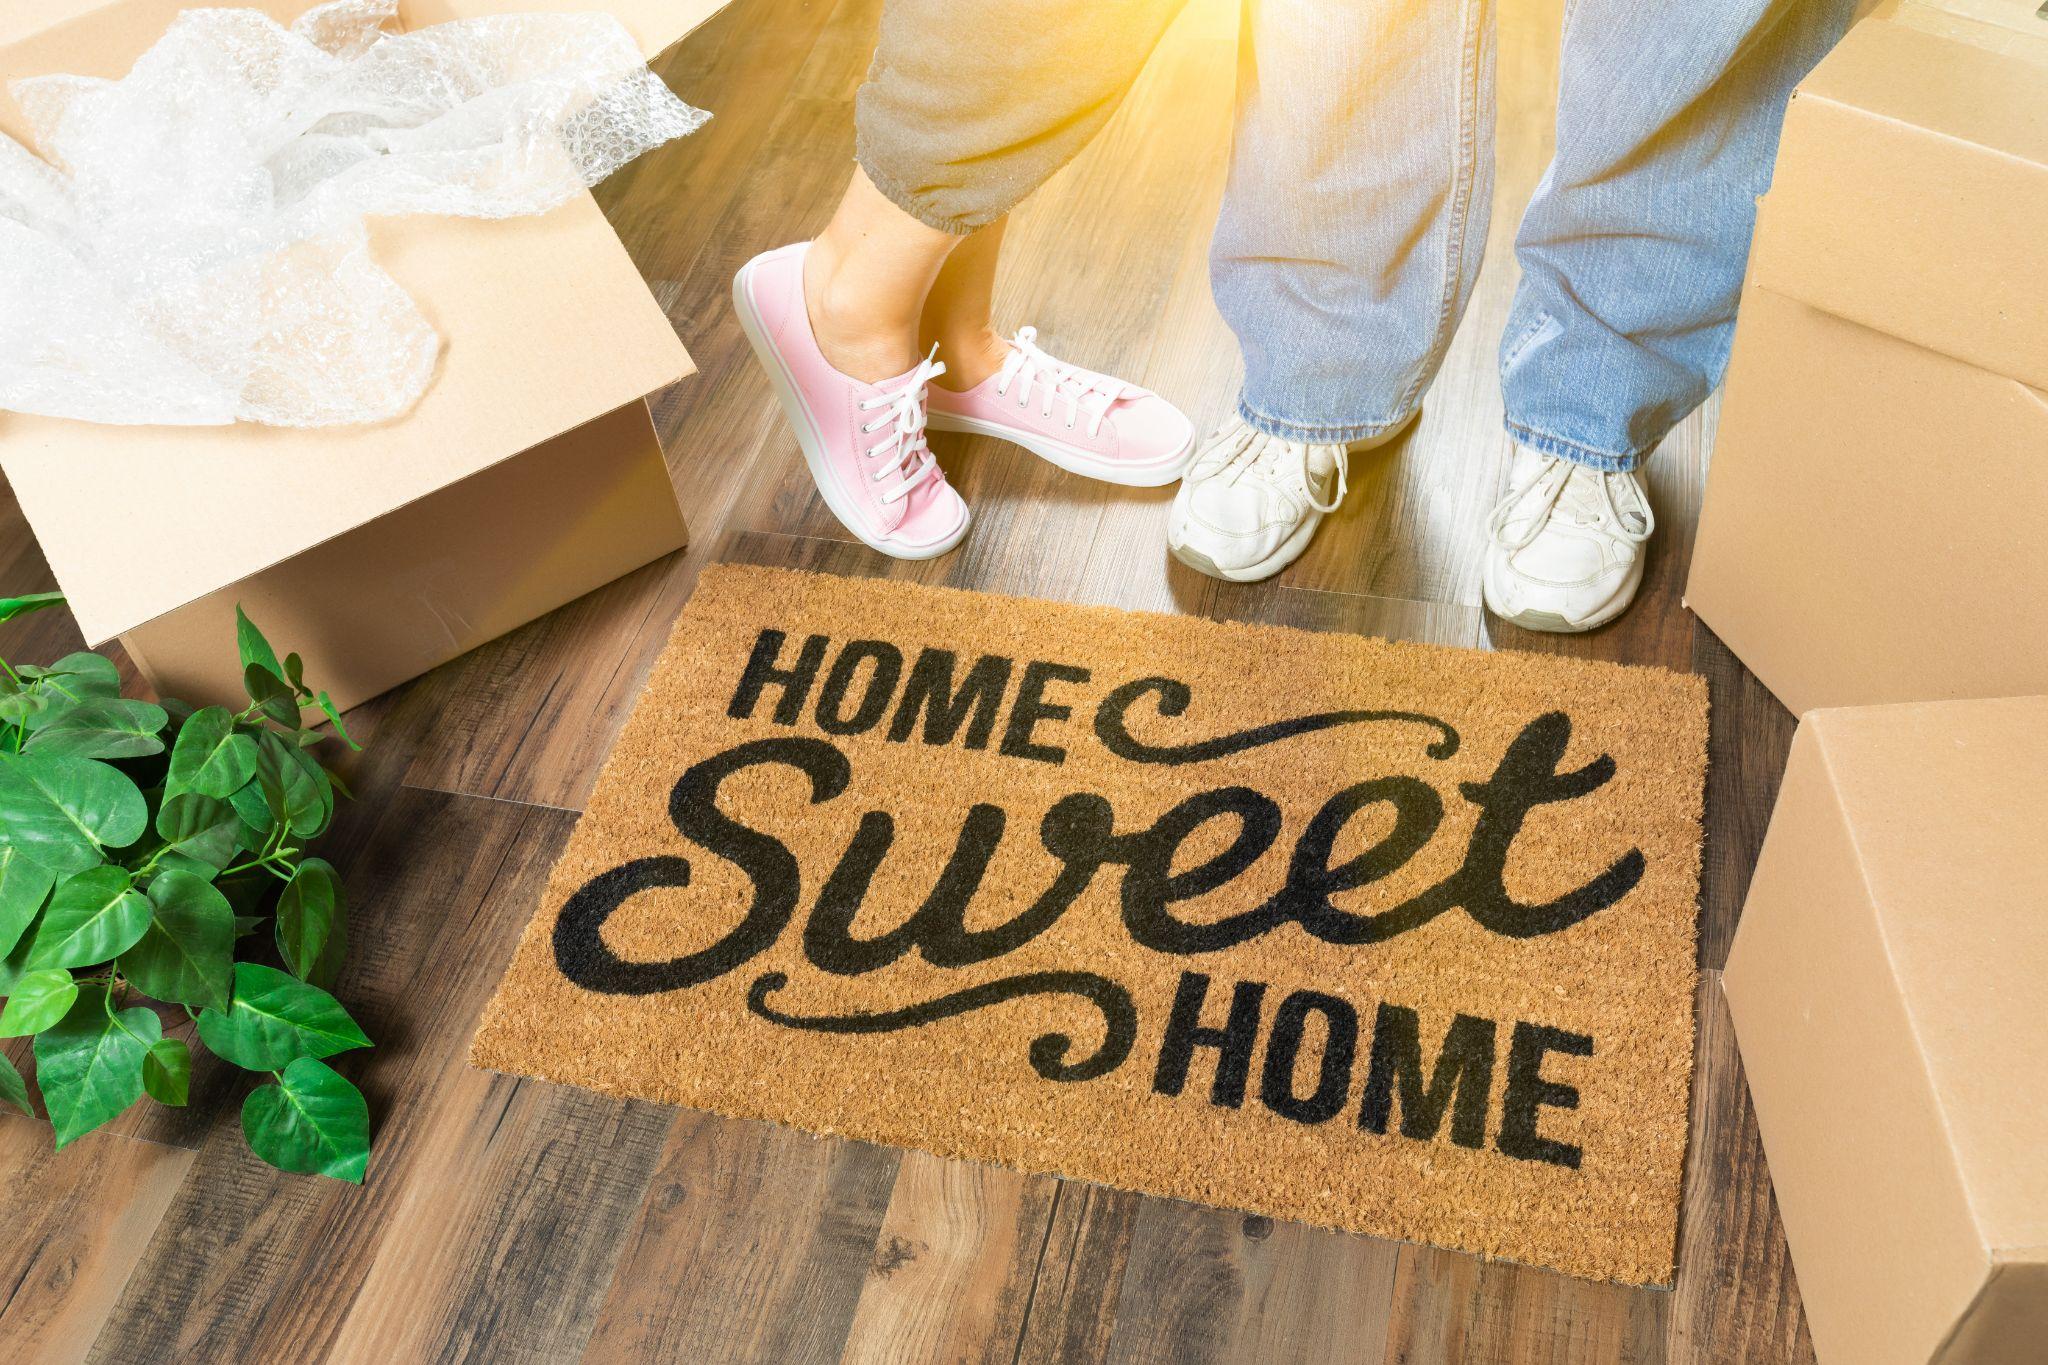 Home sweet home welcome mat with moving boxes, bubble wrap with a couple's feet 